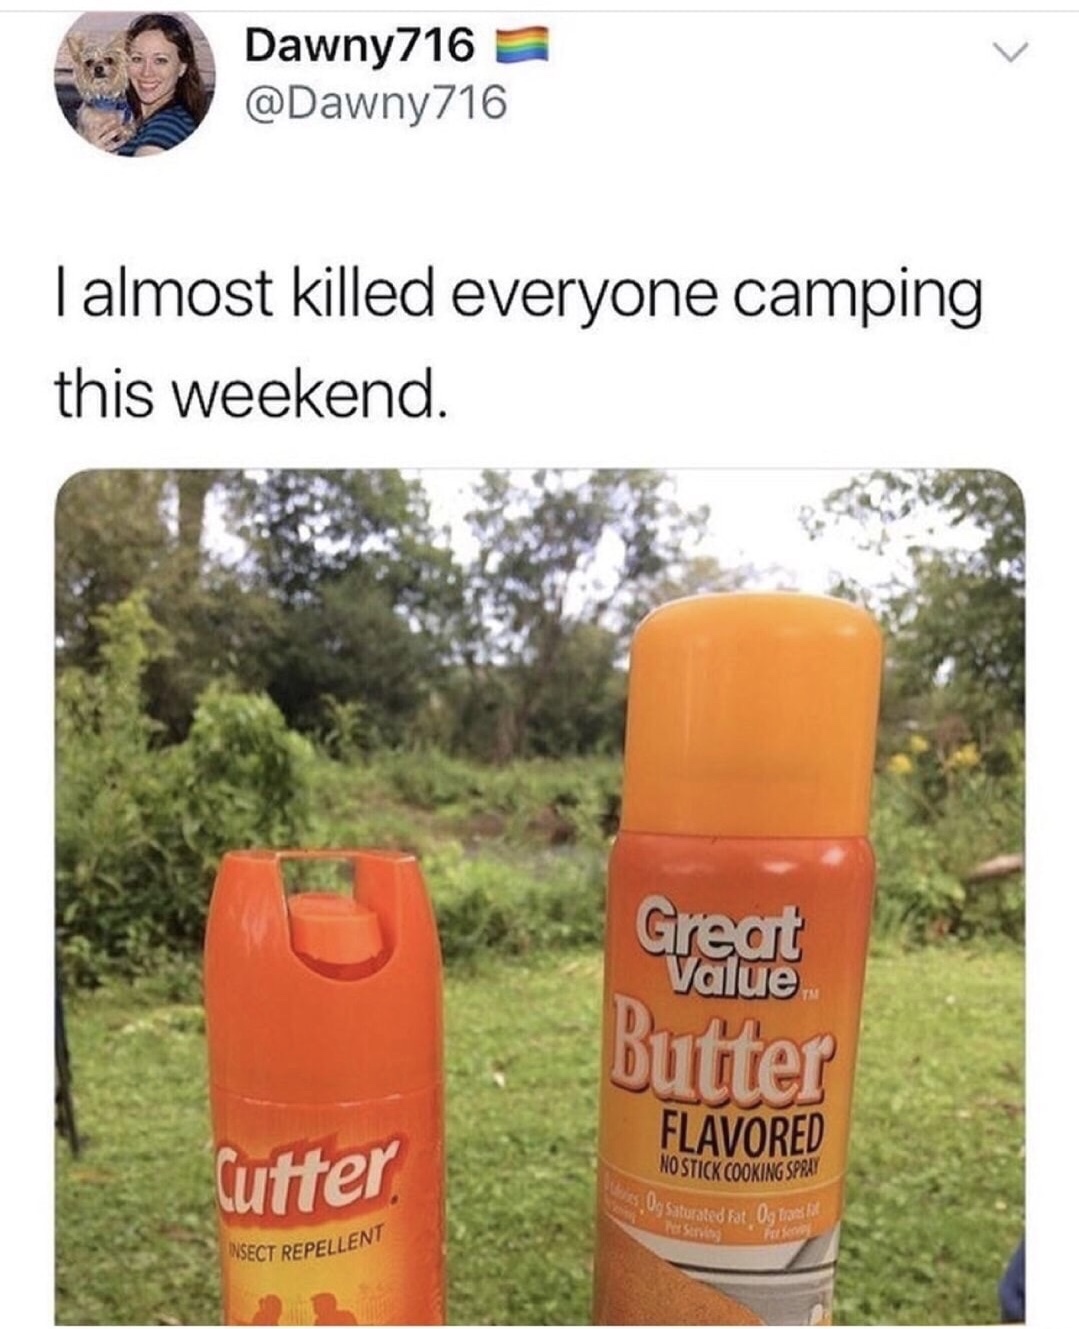 almost killed family camping - Dawny716 I almost killed everyone camping this weekend. Butter Flavored Nostick Cooking Spru Cutter Saturated fat Ota Wsect Repellent